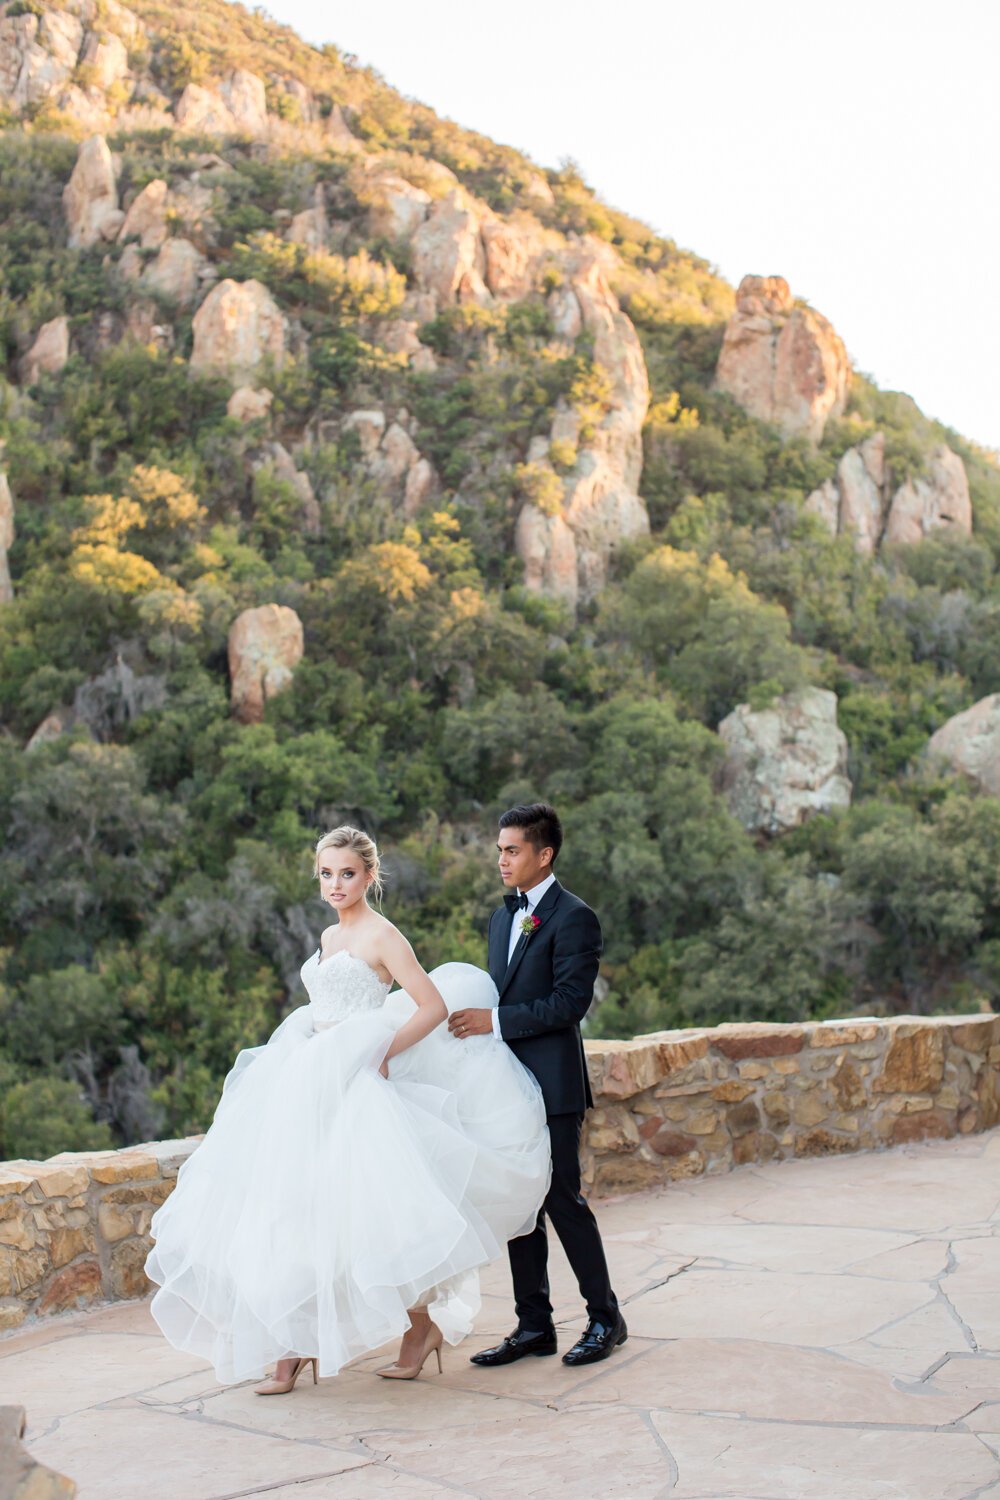 www.santabarbarawedding.com | APEX Malibu | Elizabeth Victoria Photography | Ebeling Events | Flowers by Maria | Malibu Clothes | BHLDN | Bride and Groom with Mountains in Background